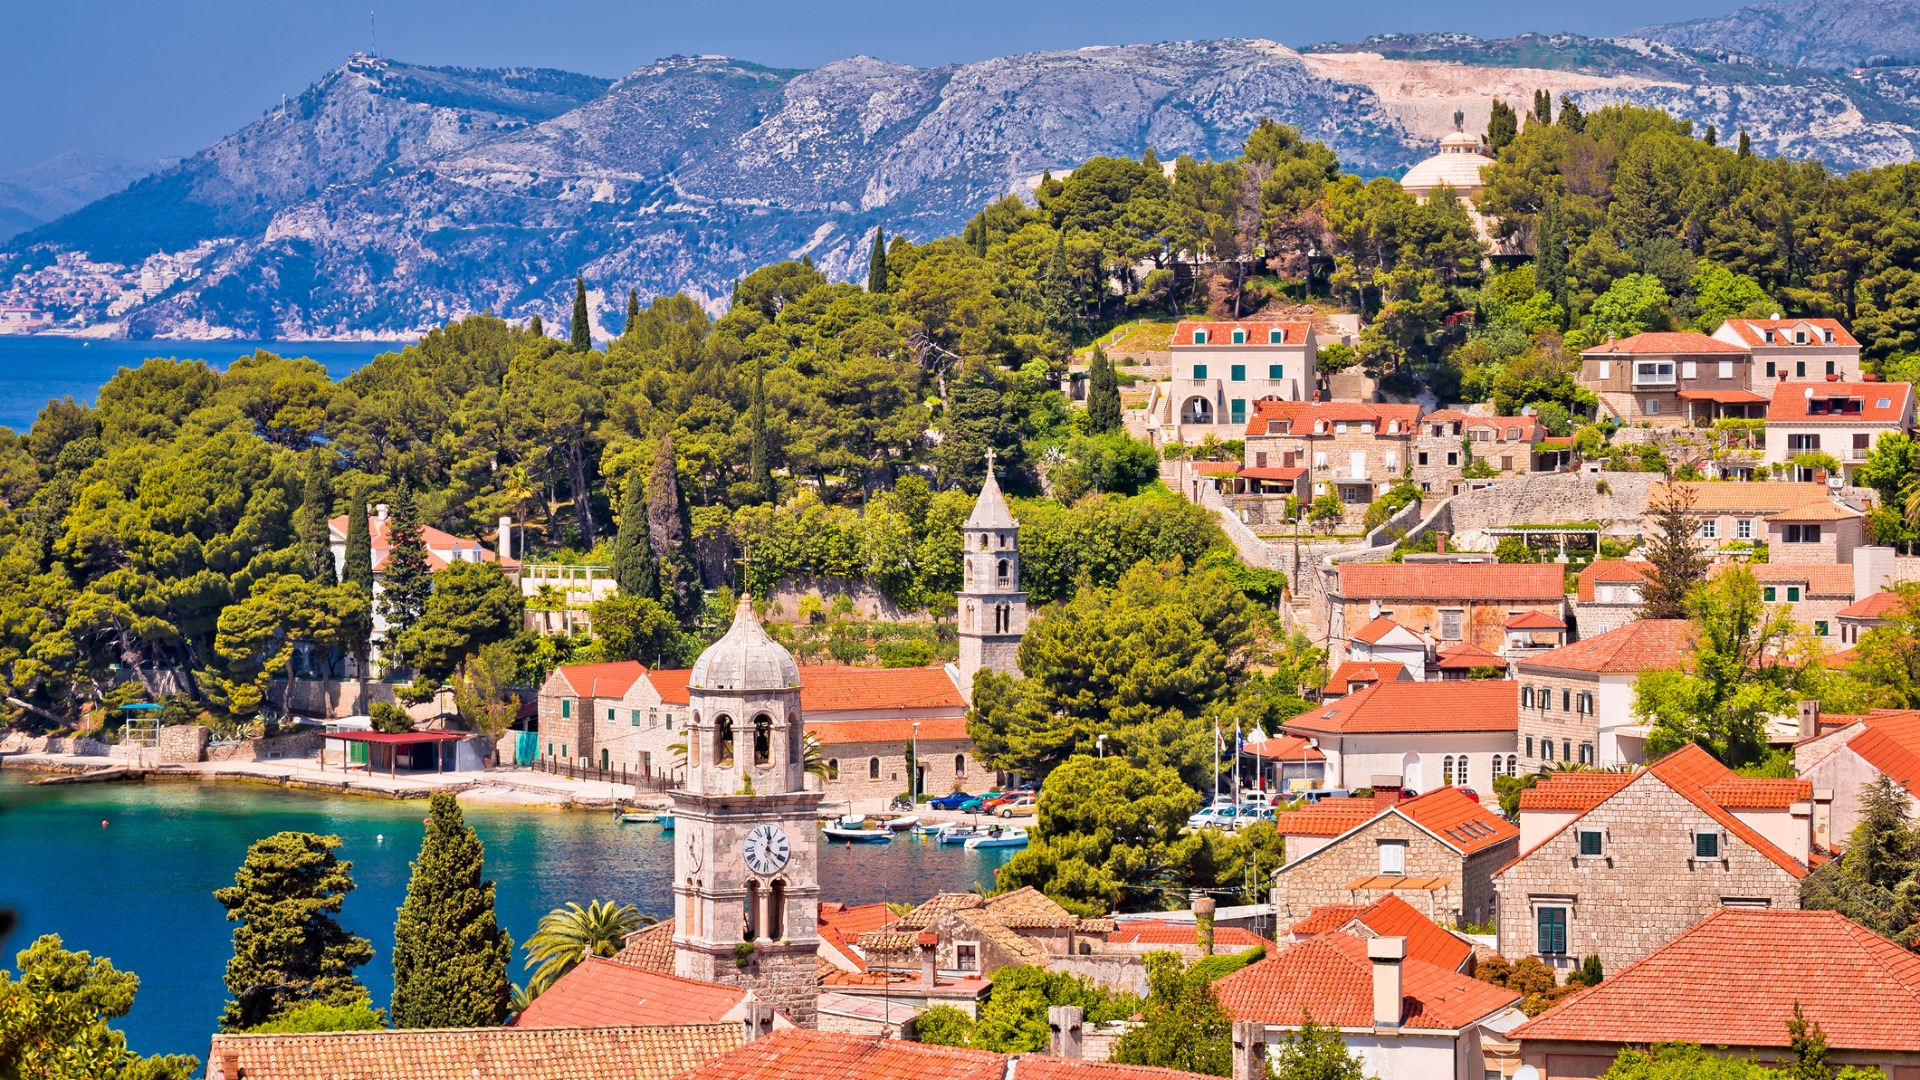 This is a panoramic view of Cavtat. There are stone houses with red-tiled roofs built among trees. In the background, there's a gorgeous beach. 